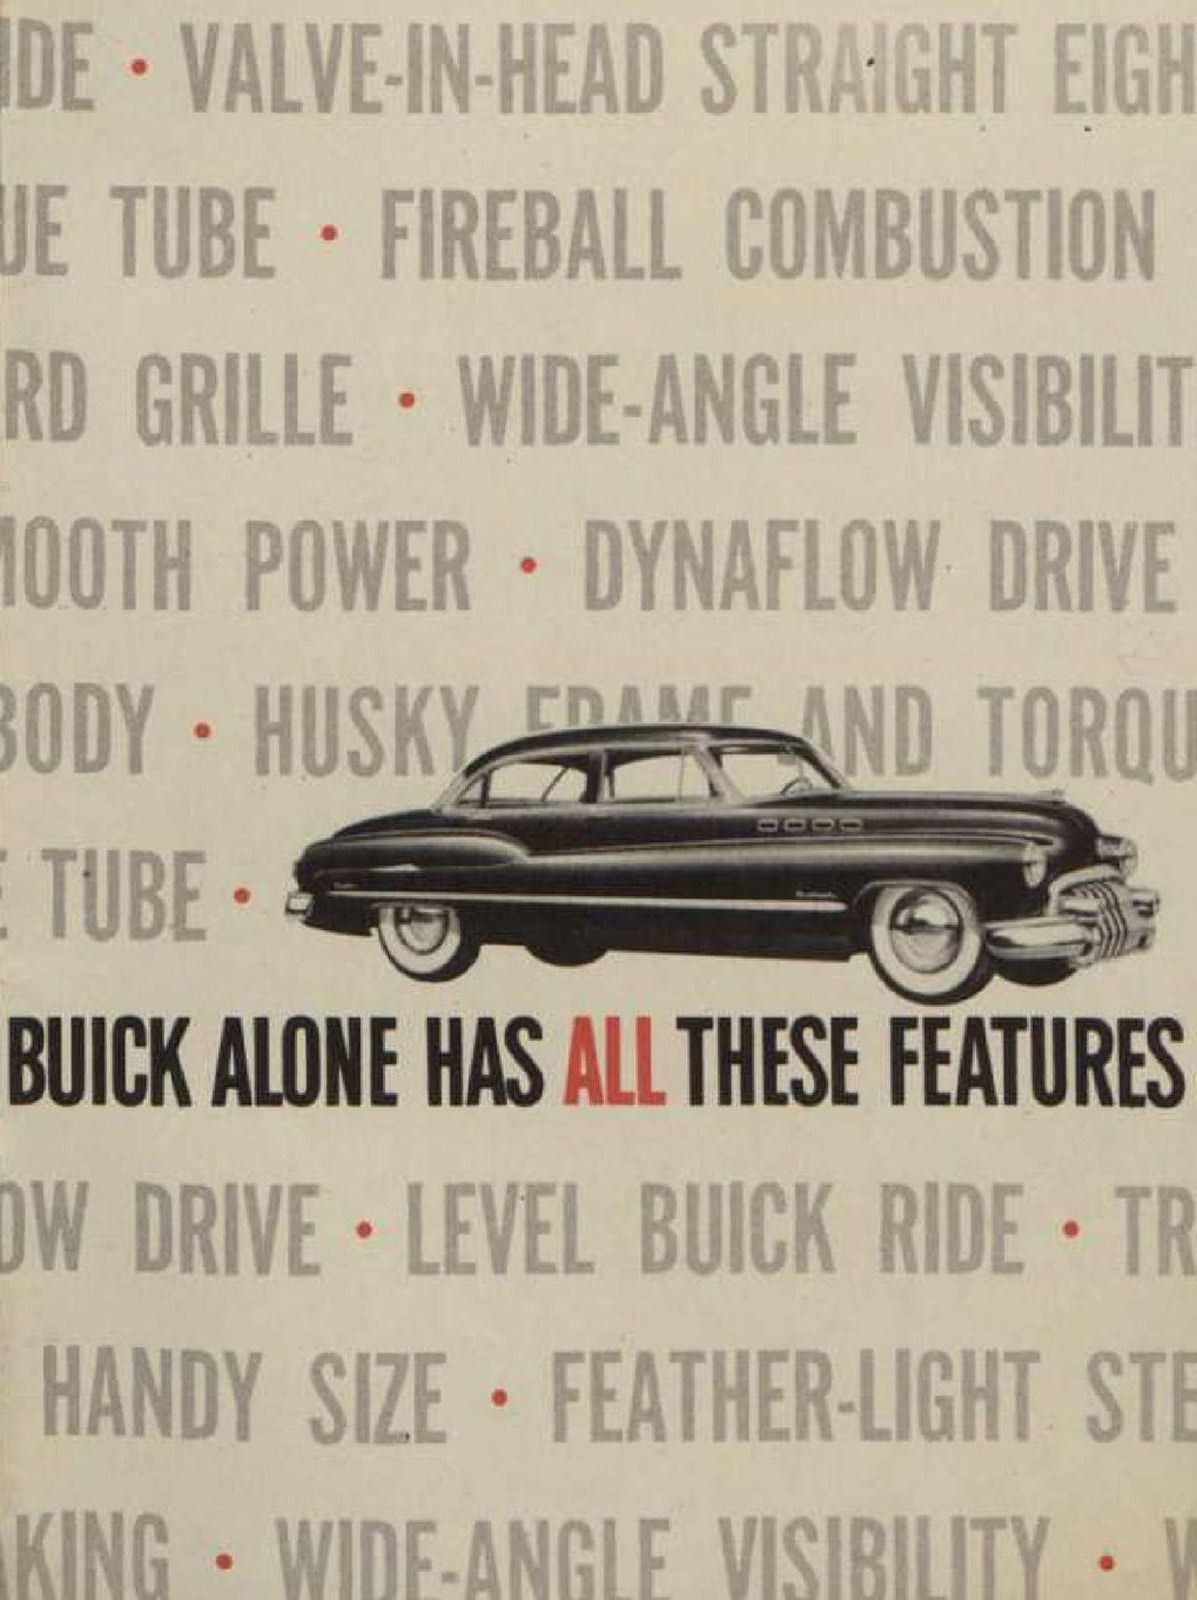 1950 Buick Features.pdf-2023-11-21 12.37.50_Page_01